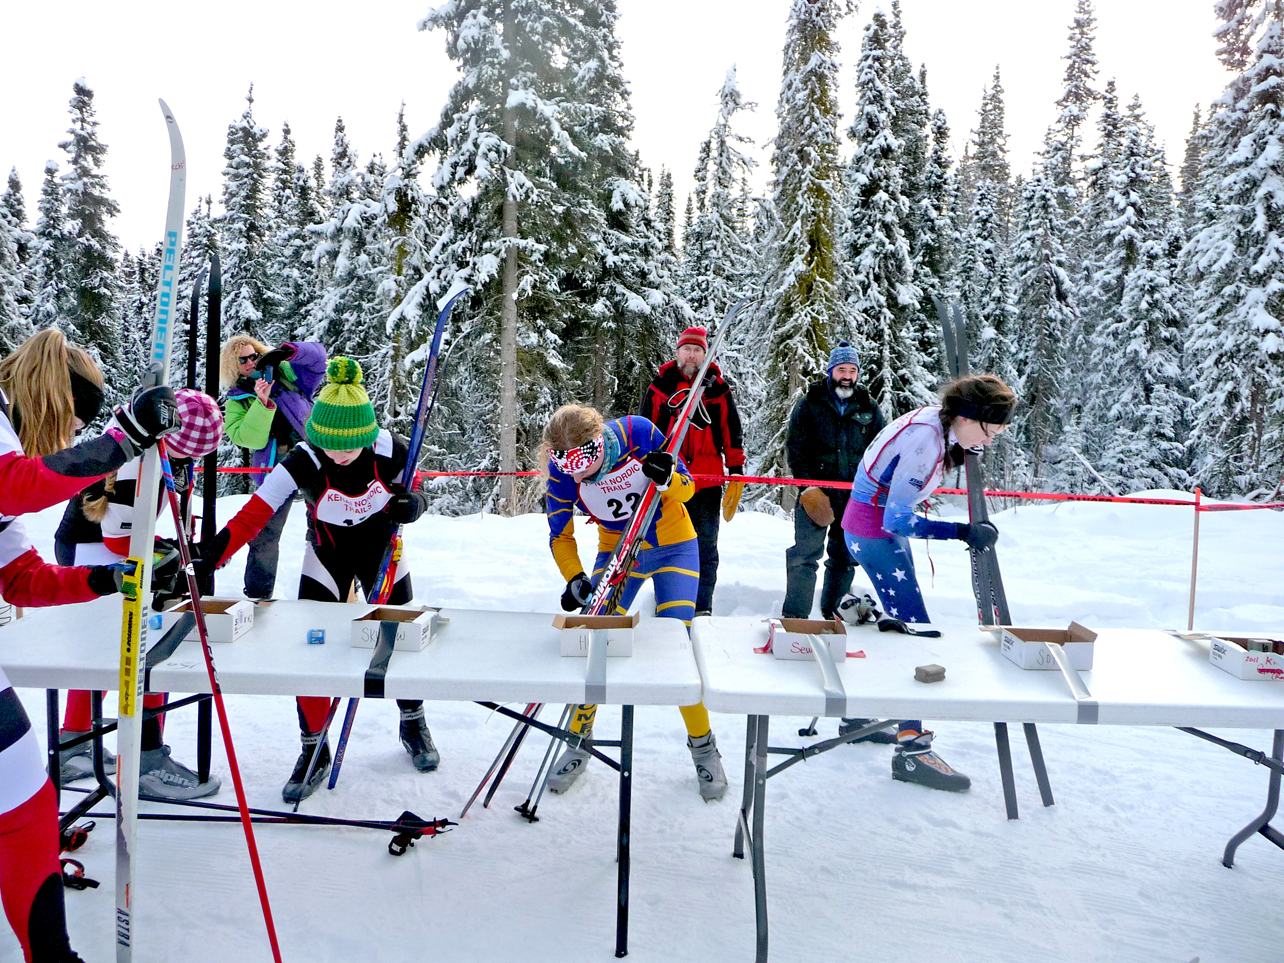 Mariner Tisha Lovett, second from right, applies wax at the kick wax station along with other skiers participating in the Kenai Klassic. One of the things that makes the race unique is that skiers have to apply their own wax.